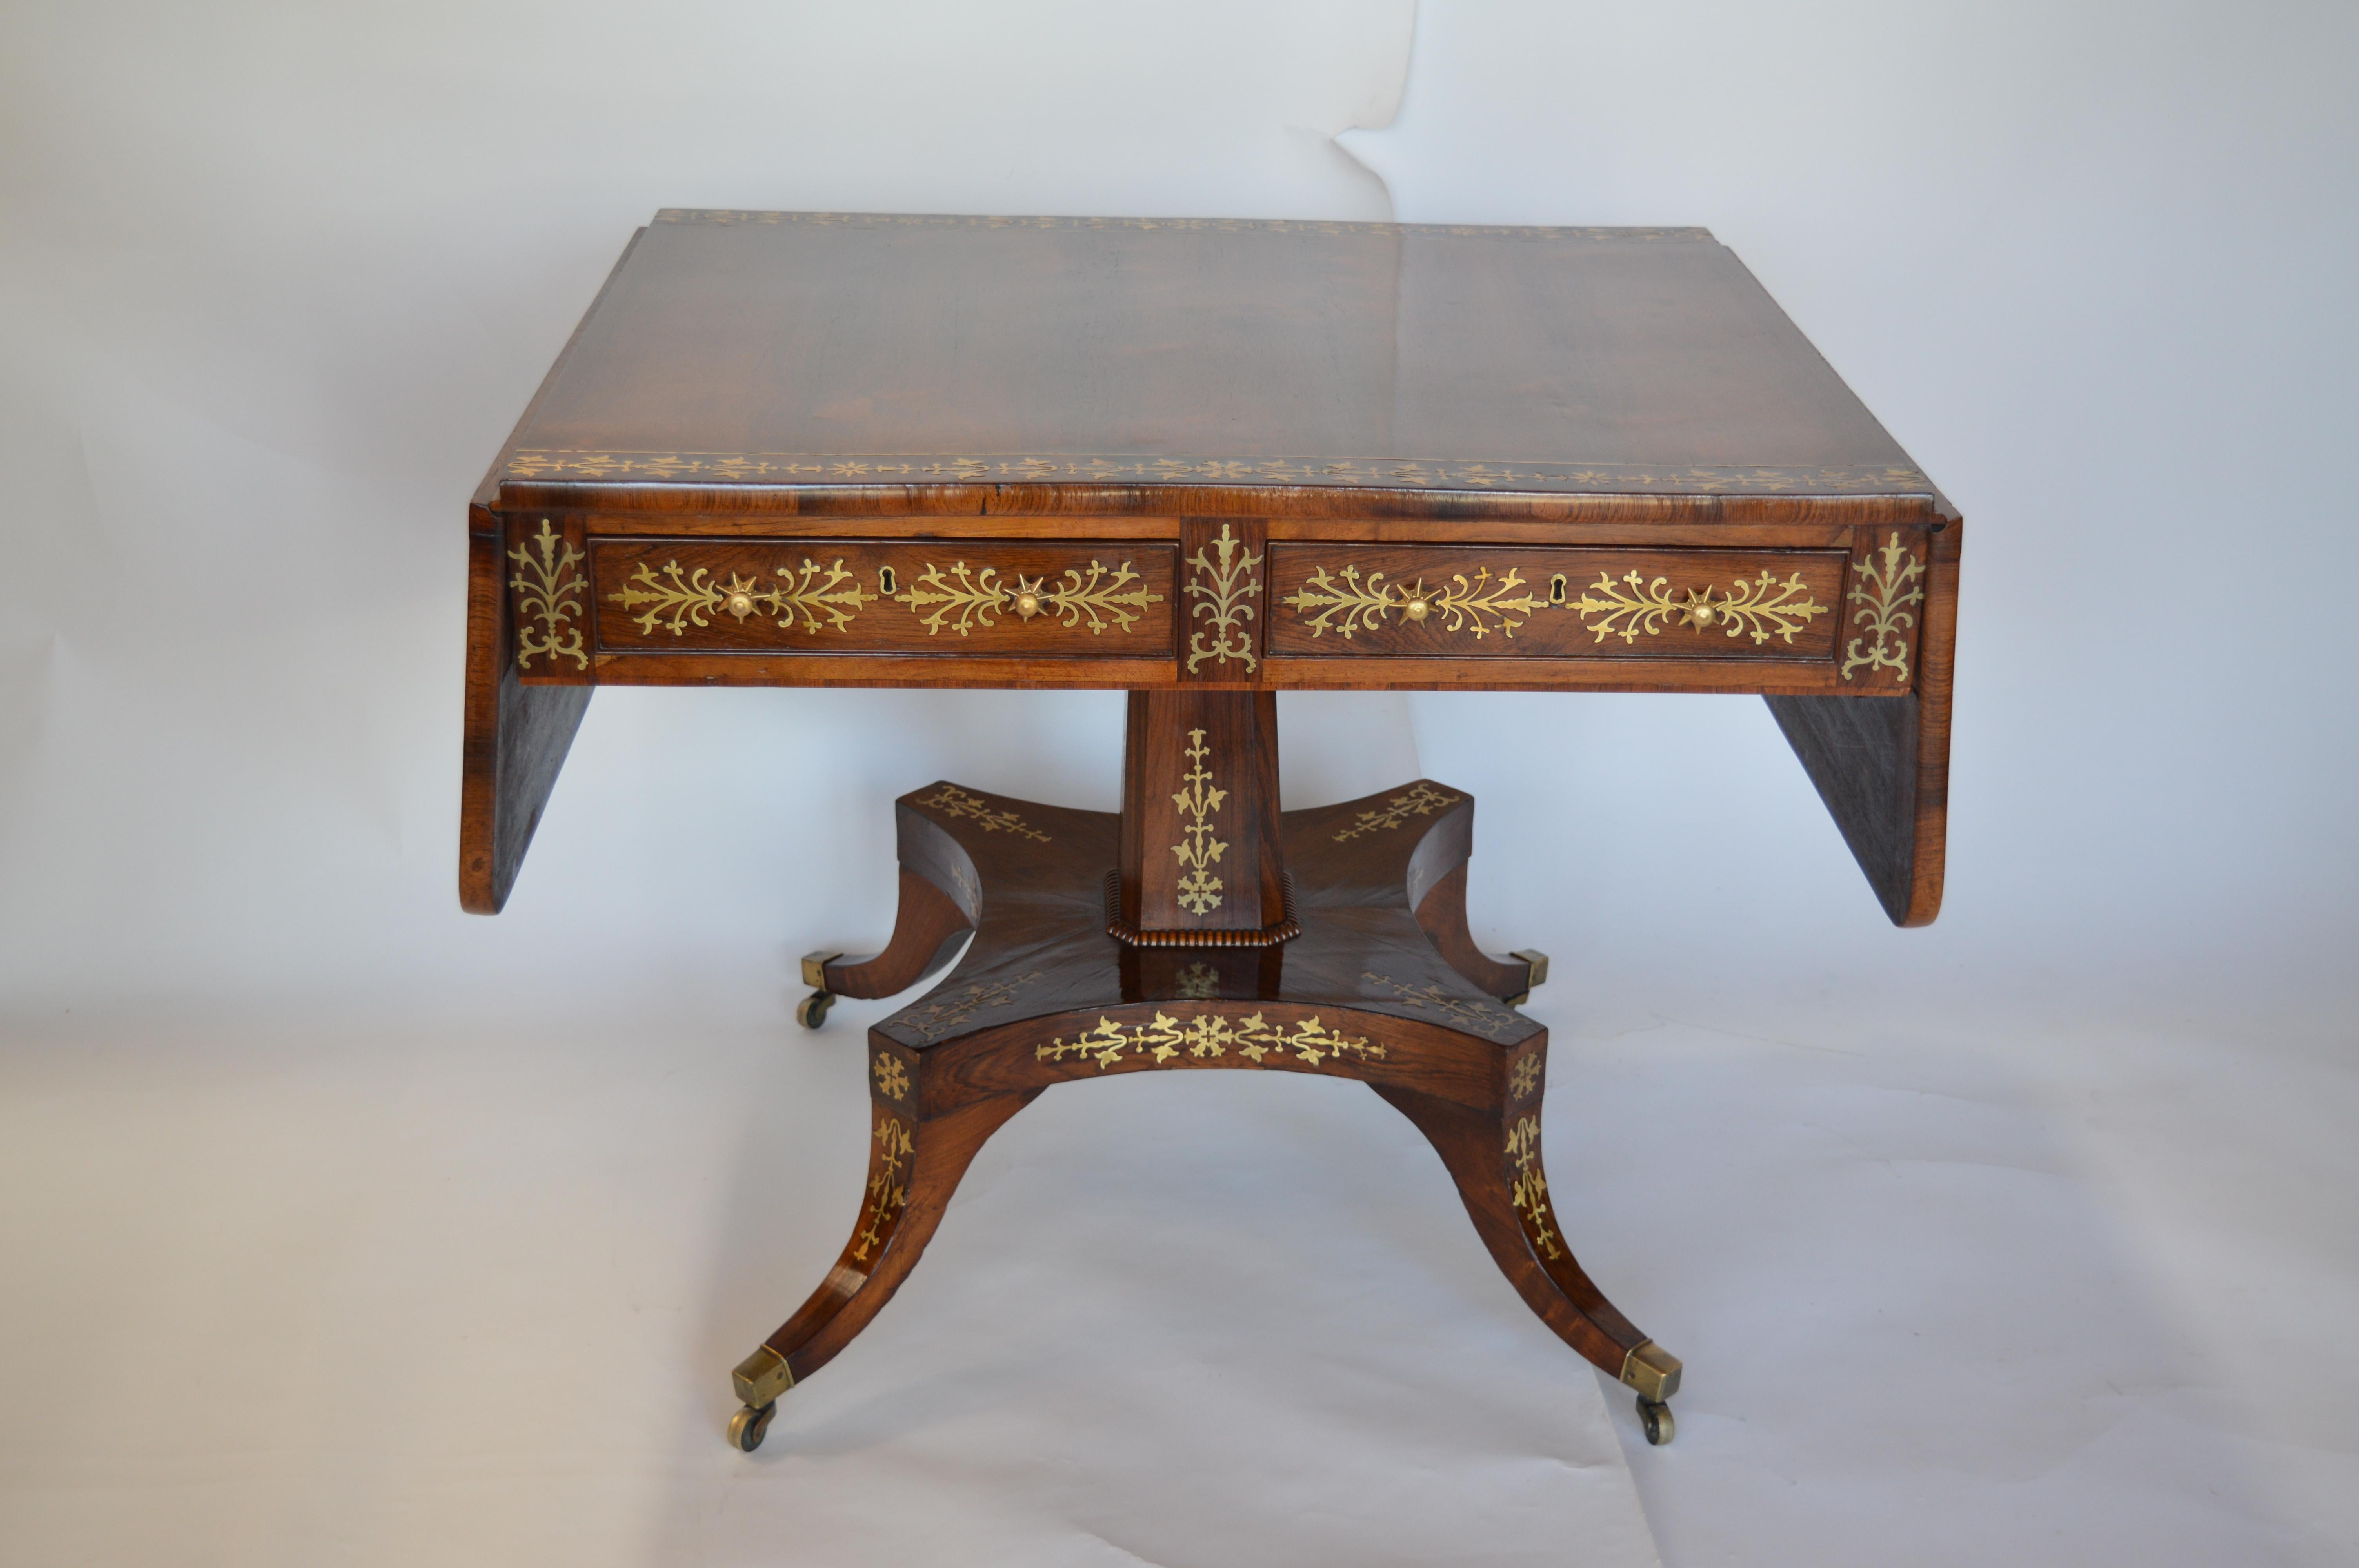 Regency Rosewood Pedestal Table with Brass Inlaid For Sale 3